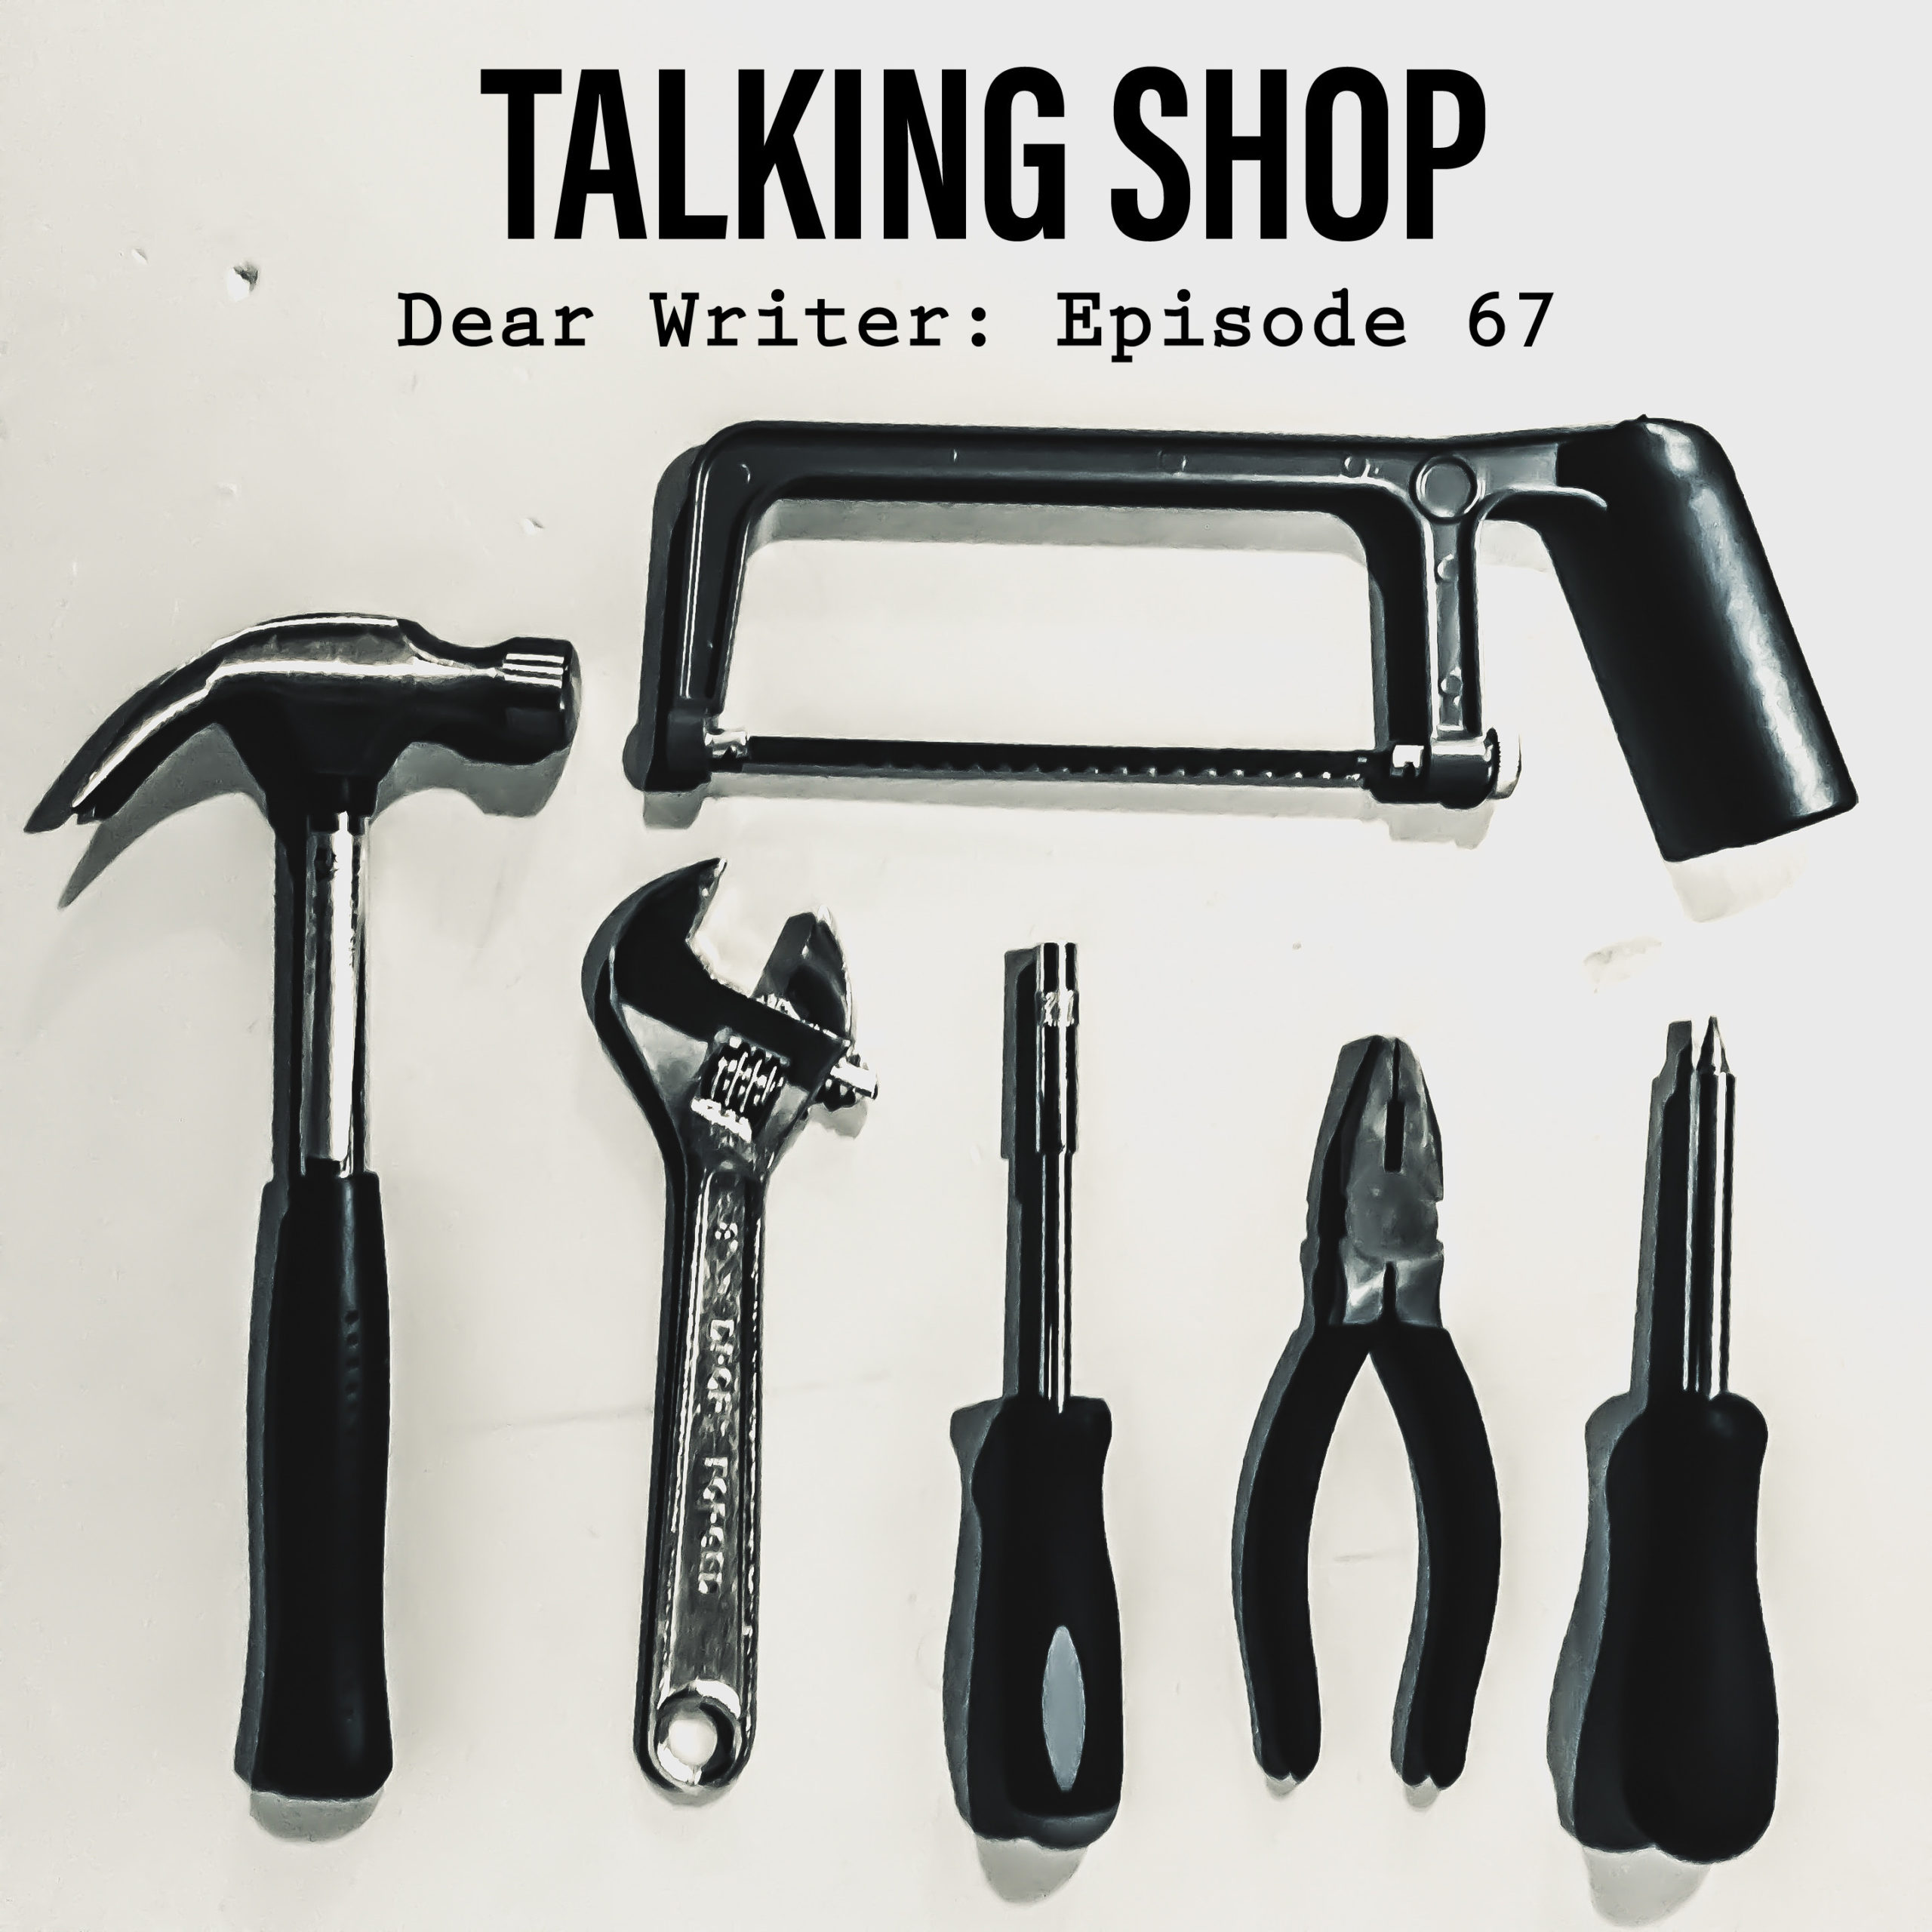 Episode 67: Talking Shop - Newspaper Blackout / Summoning Ghosts and Releasing Angels